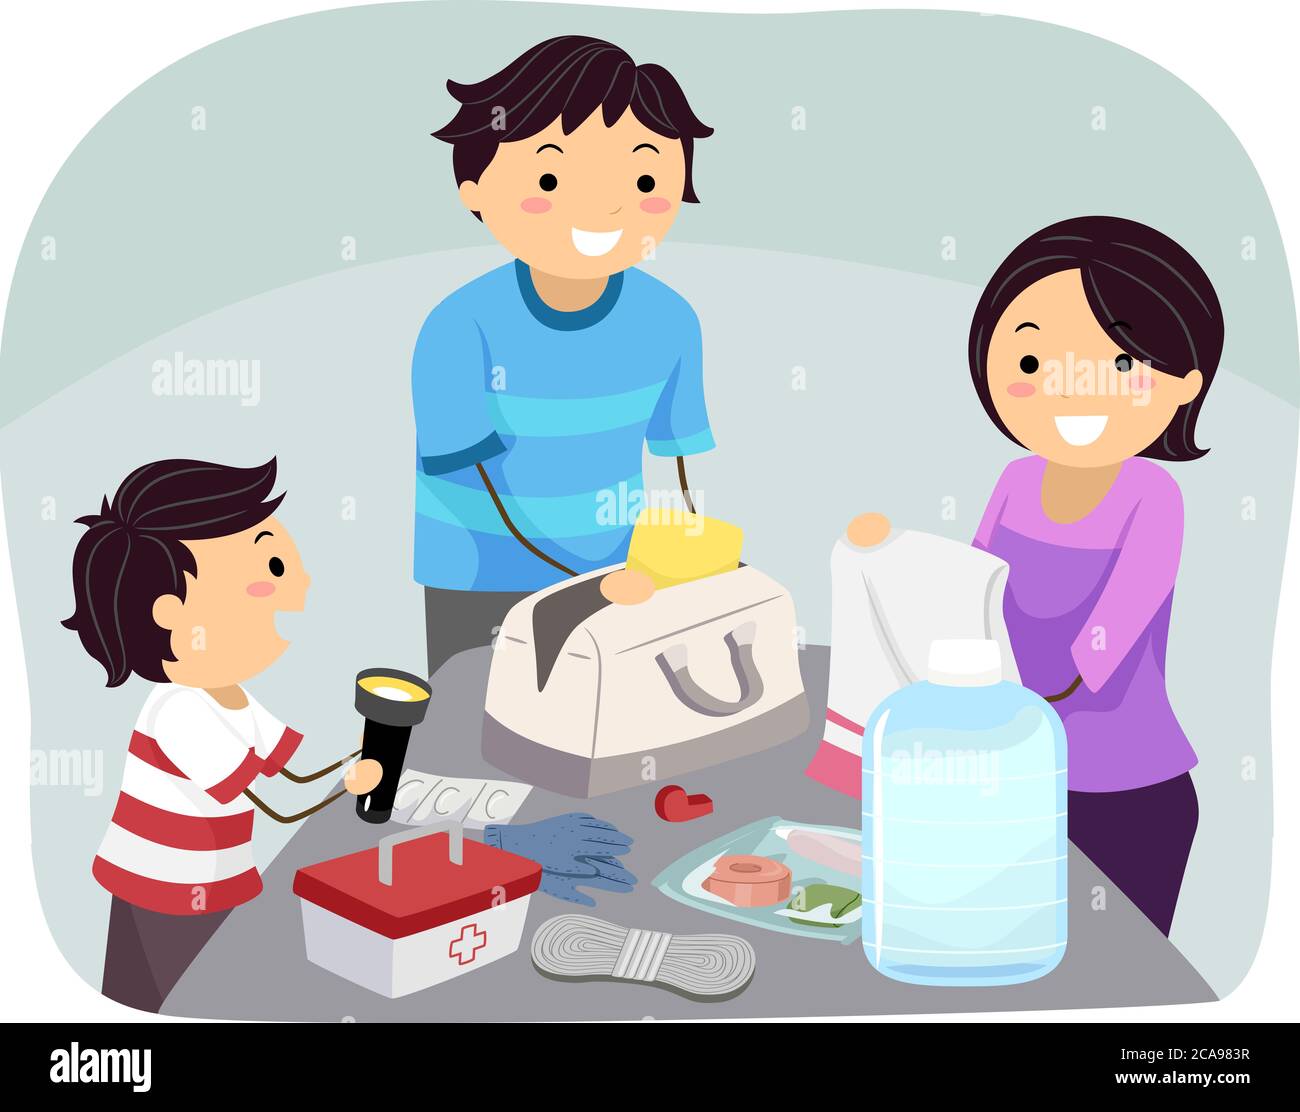 Illustration of a Kid Boy with Parents Preparing an Emergency Kit